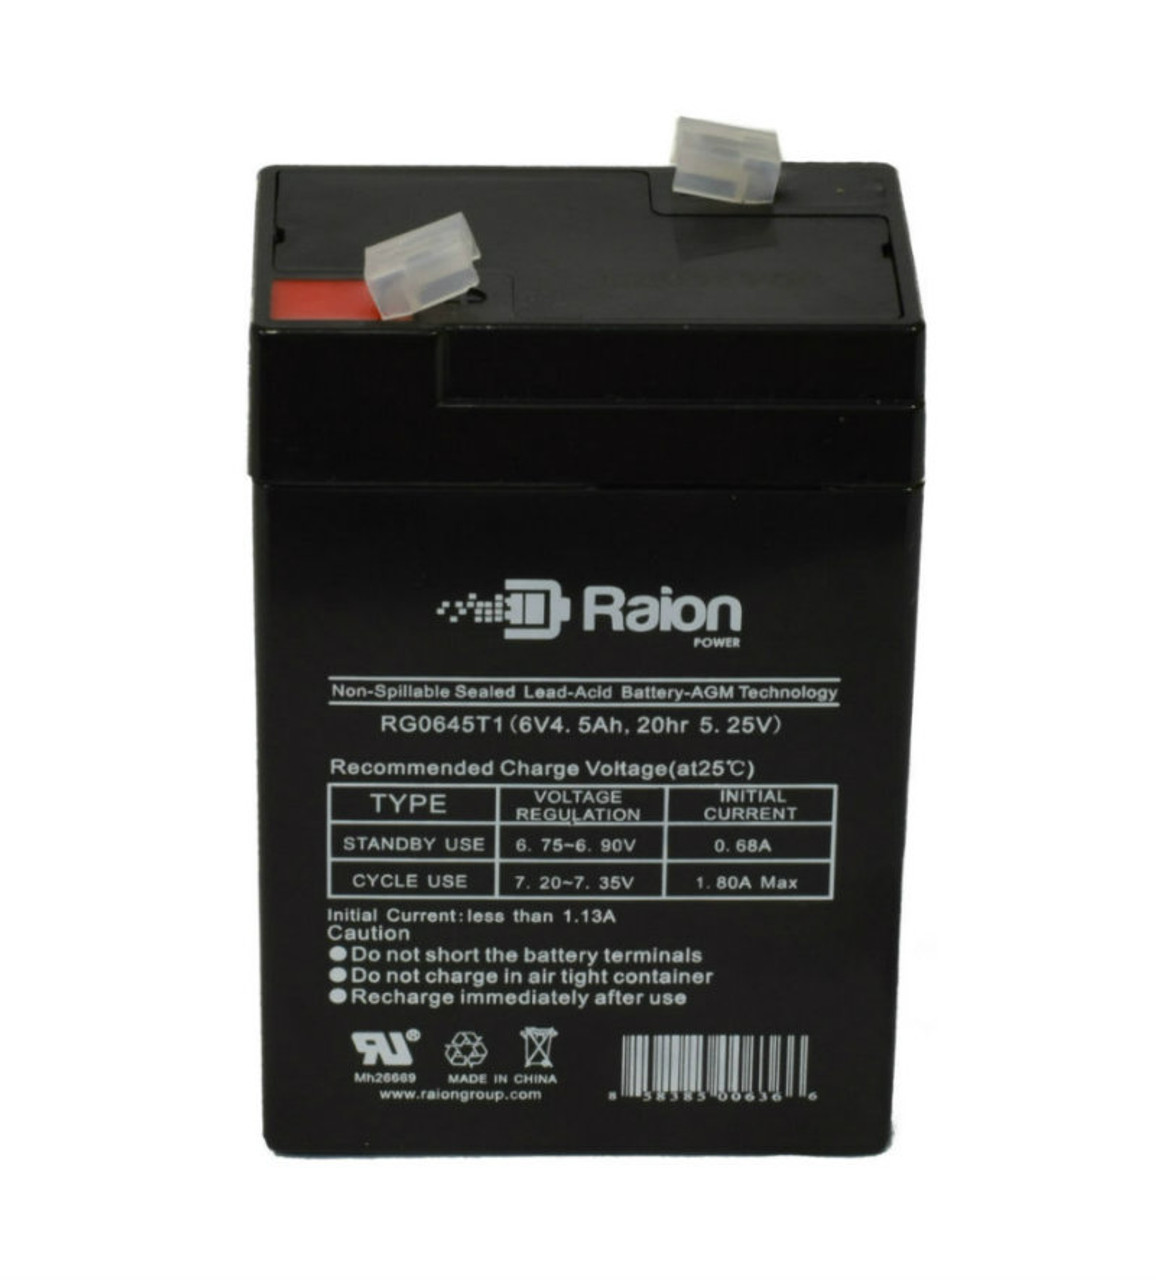 Raion Power RG0645T1 Replacement Battery Cartridge for Kaiying KS4.2-6